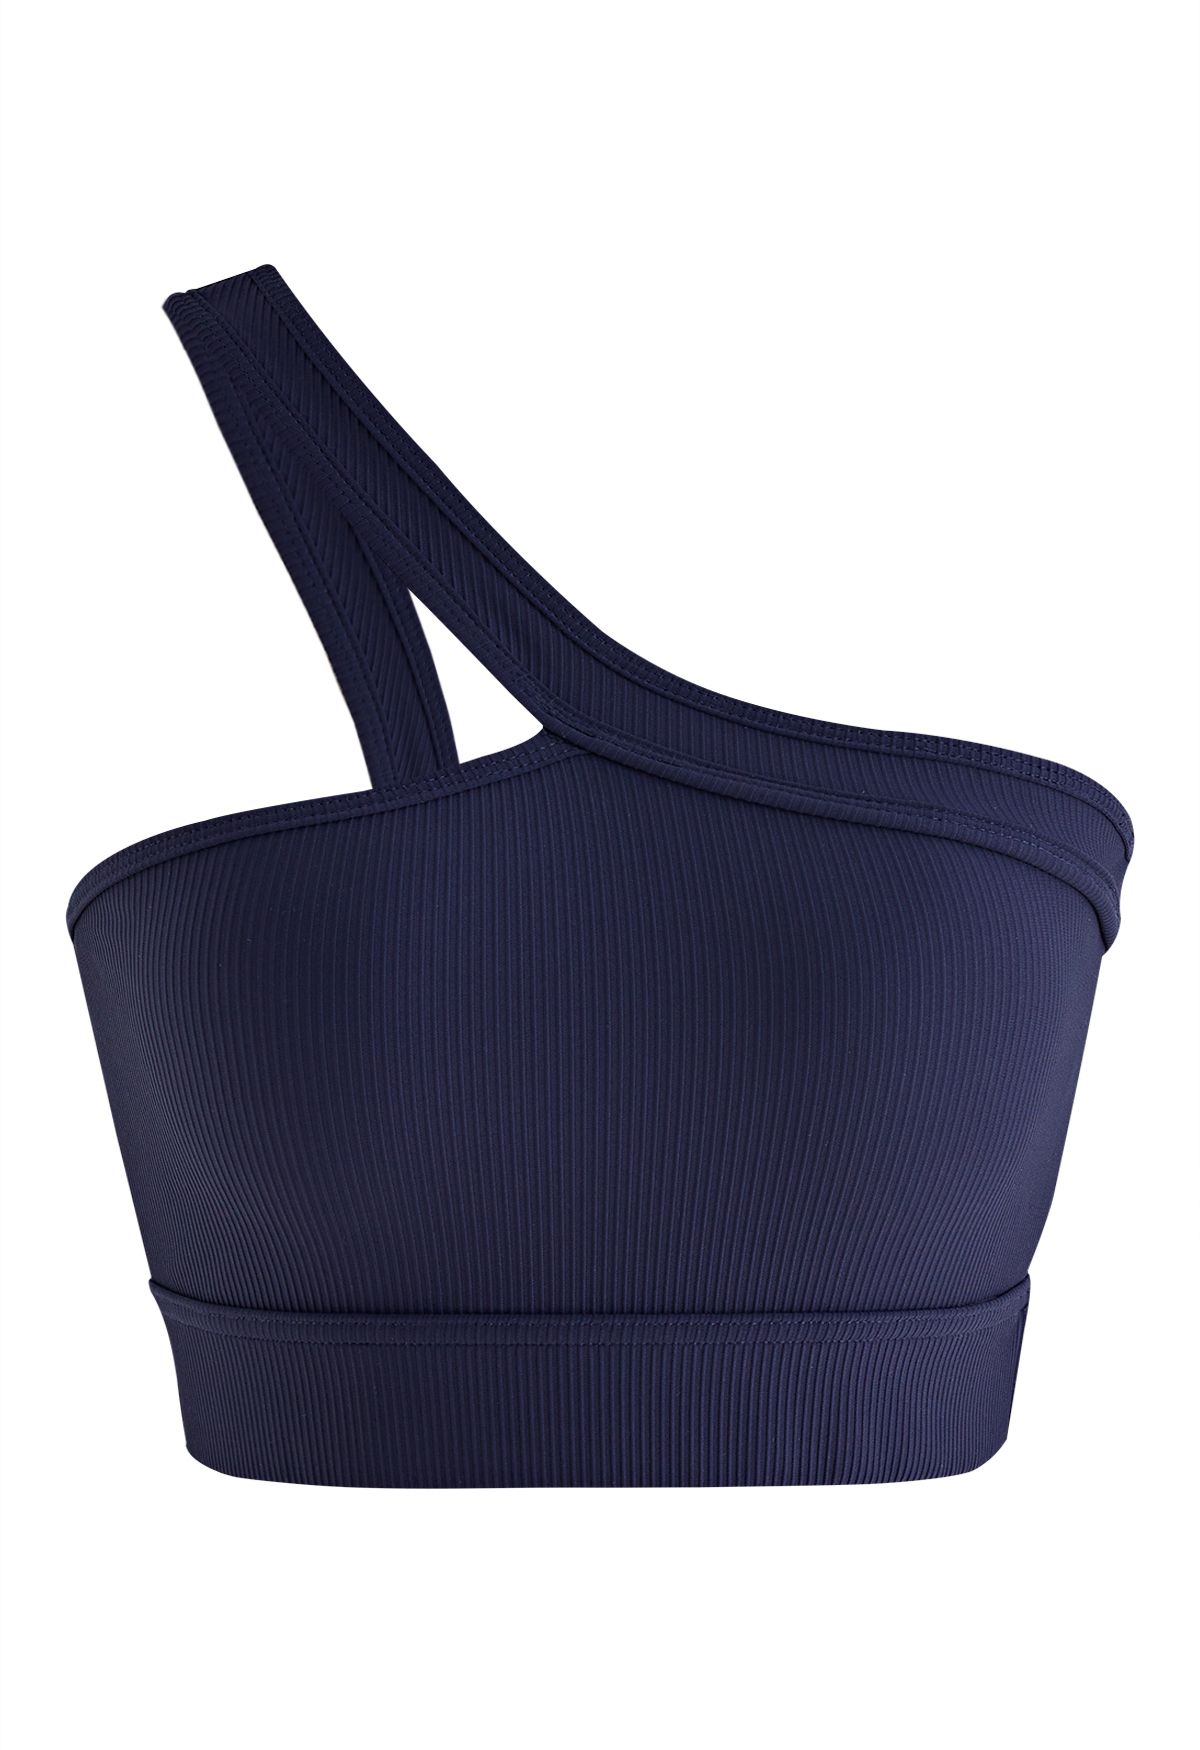 Slanted Halter Neck Ribbed Sports Bra in Navy - Retro, Indie and